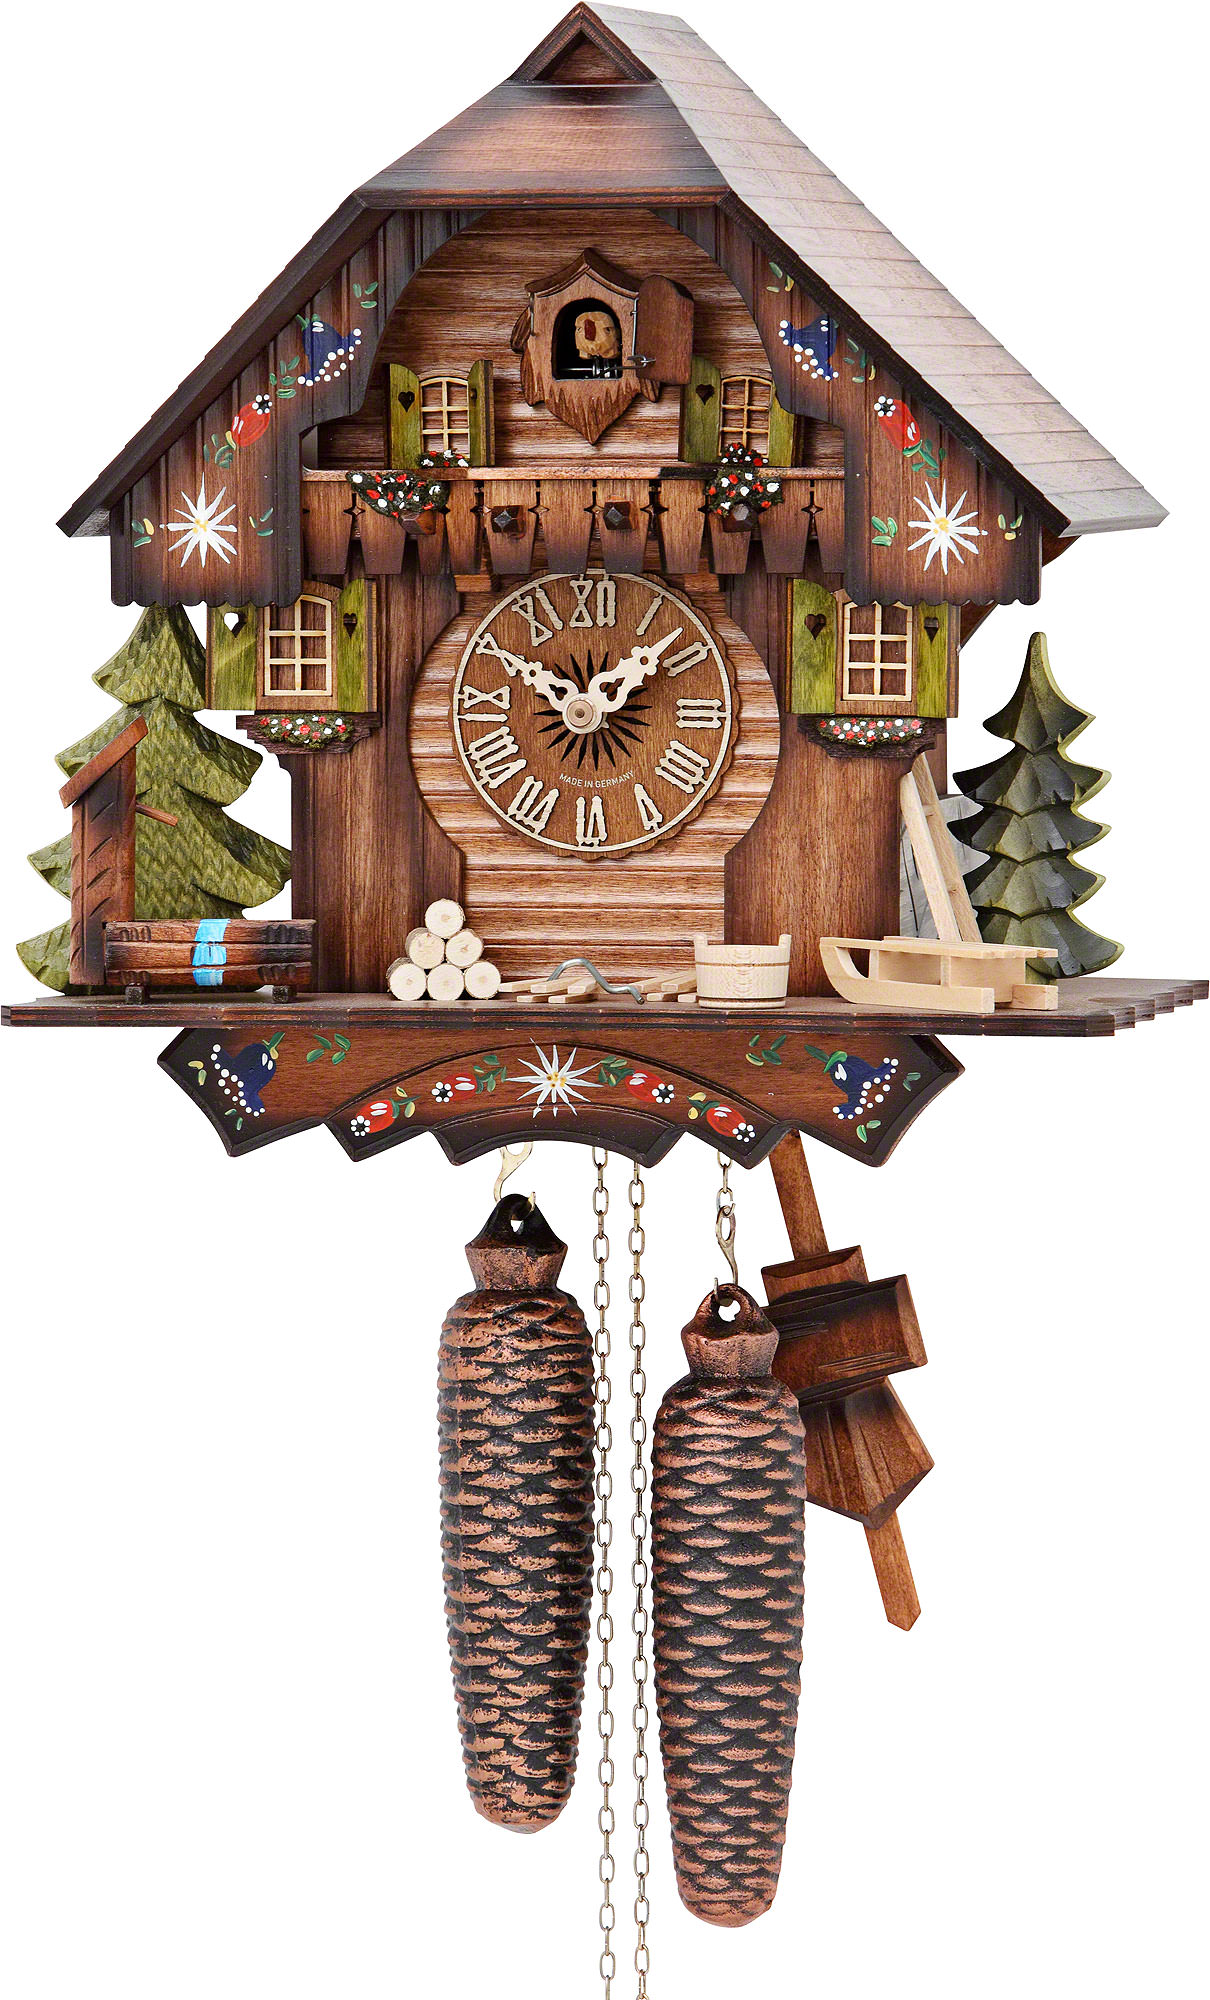 Chalet Cuckoo Clock with Movi